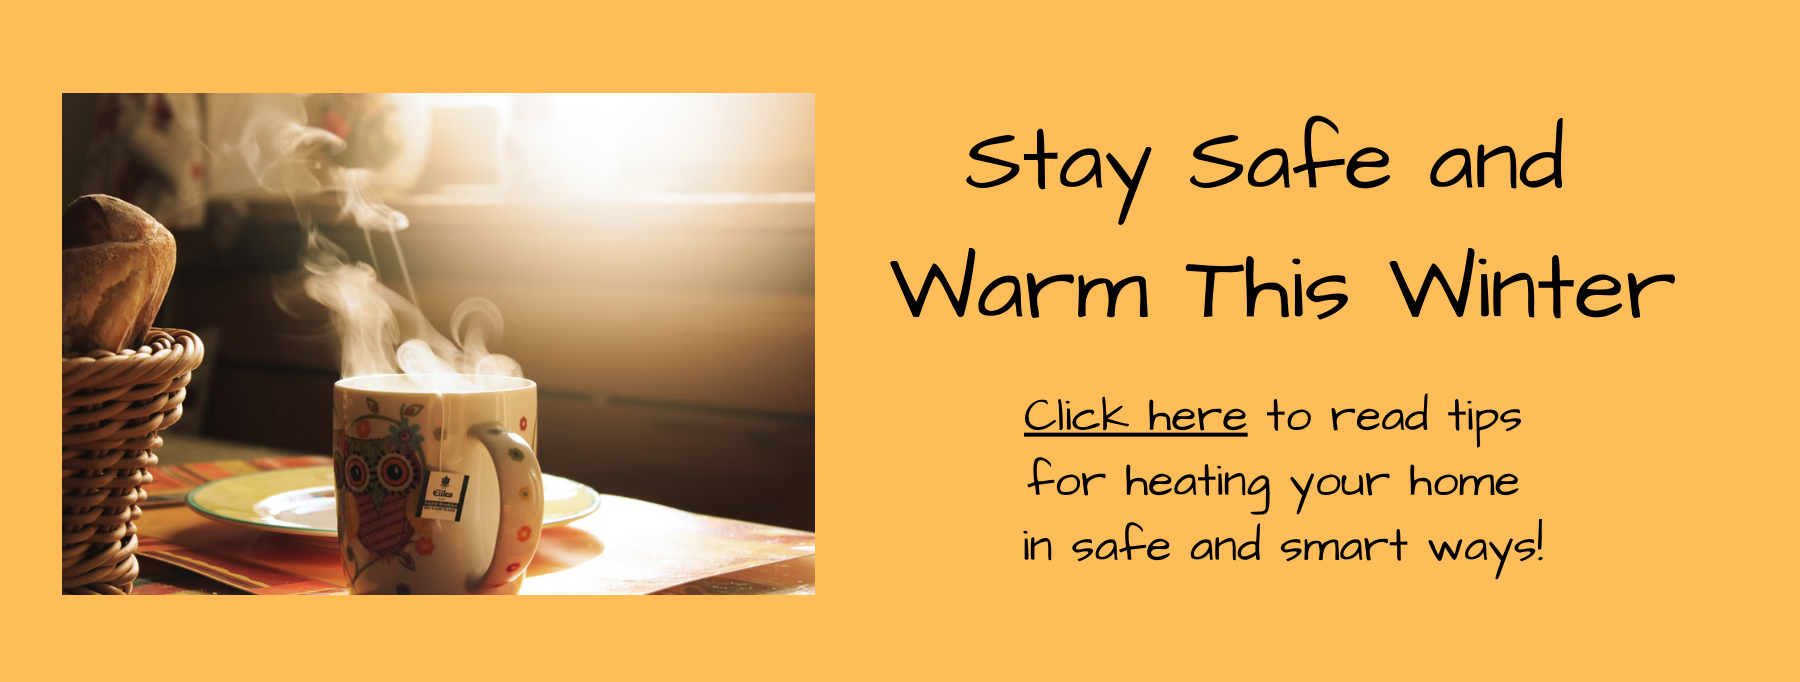 Tips for keeping safe and warm